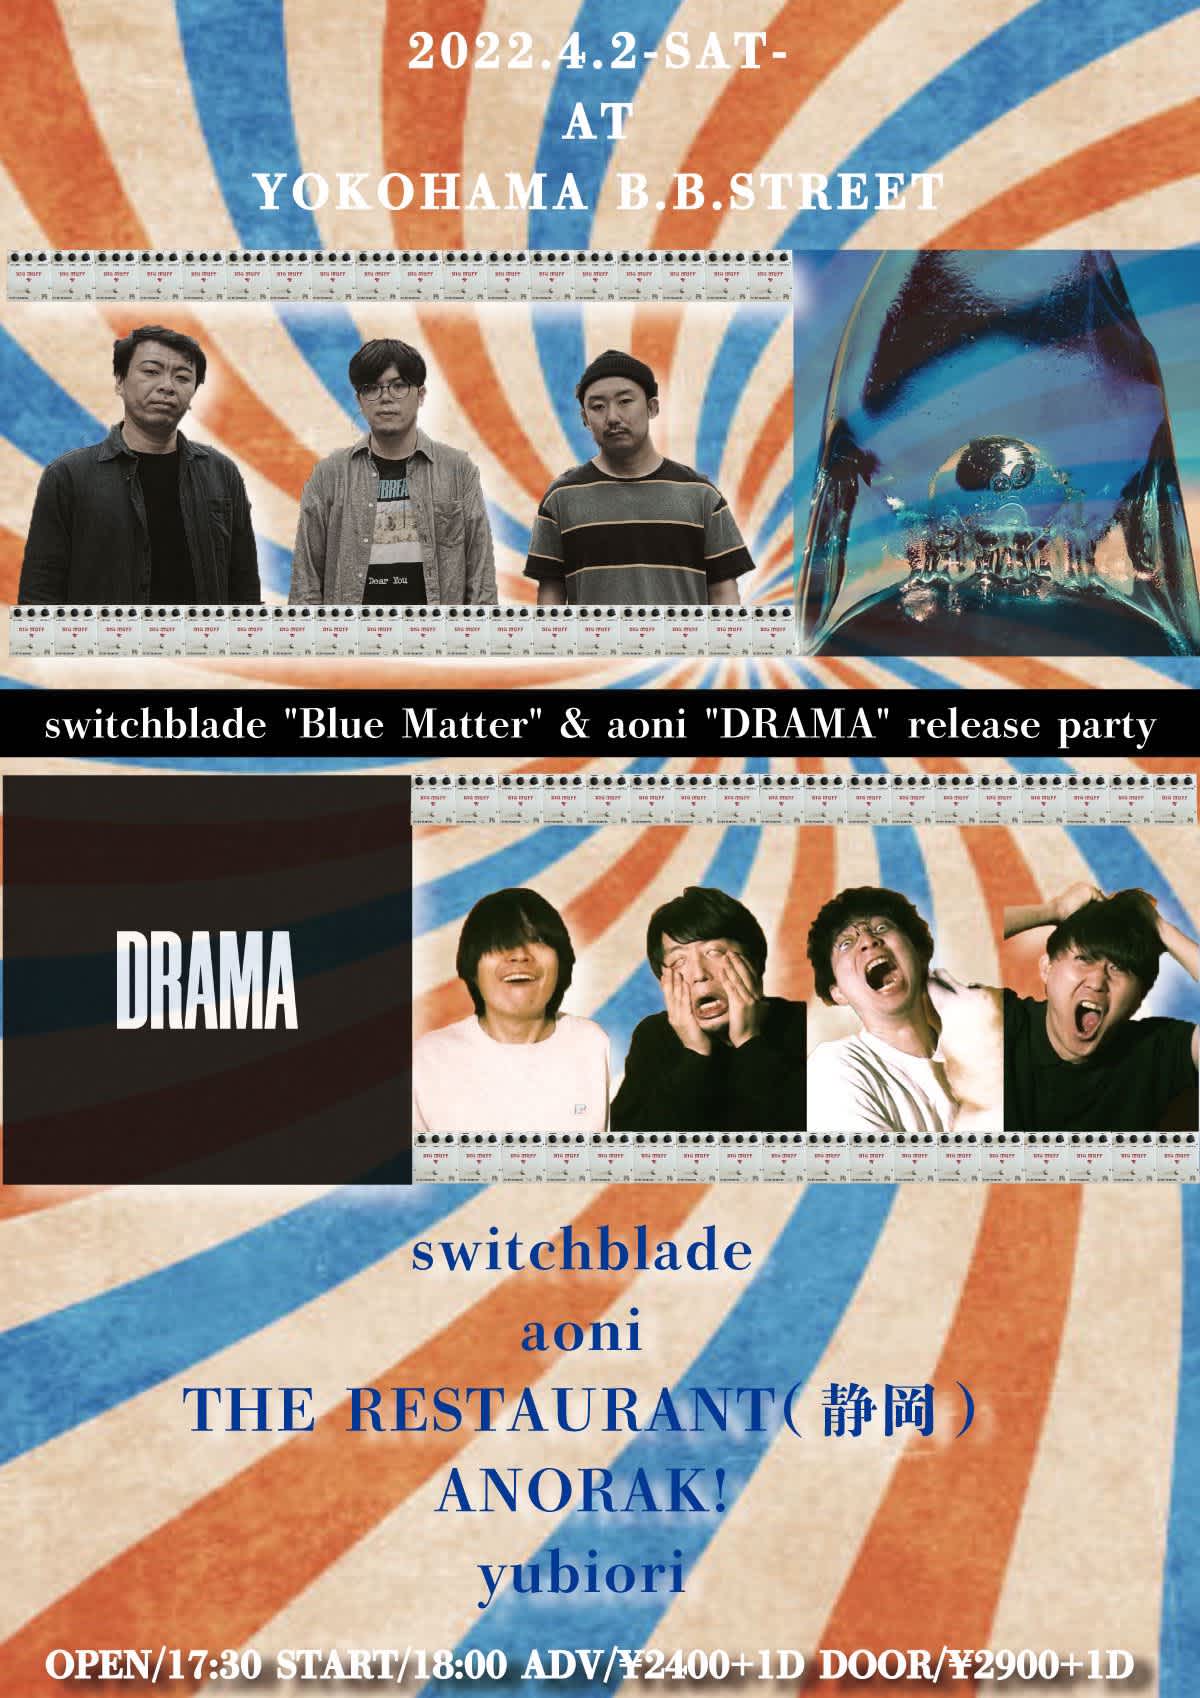 "switchblade "Blue Matter" & aoni "DRAMA" release party"のイメージ1